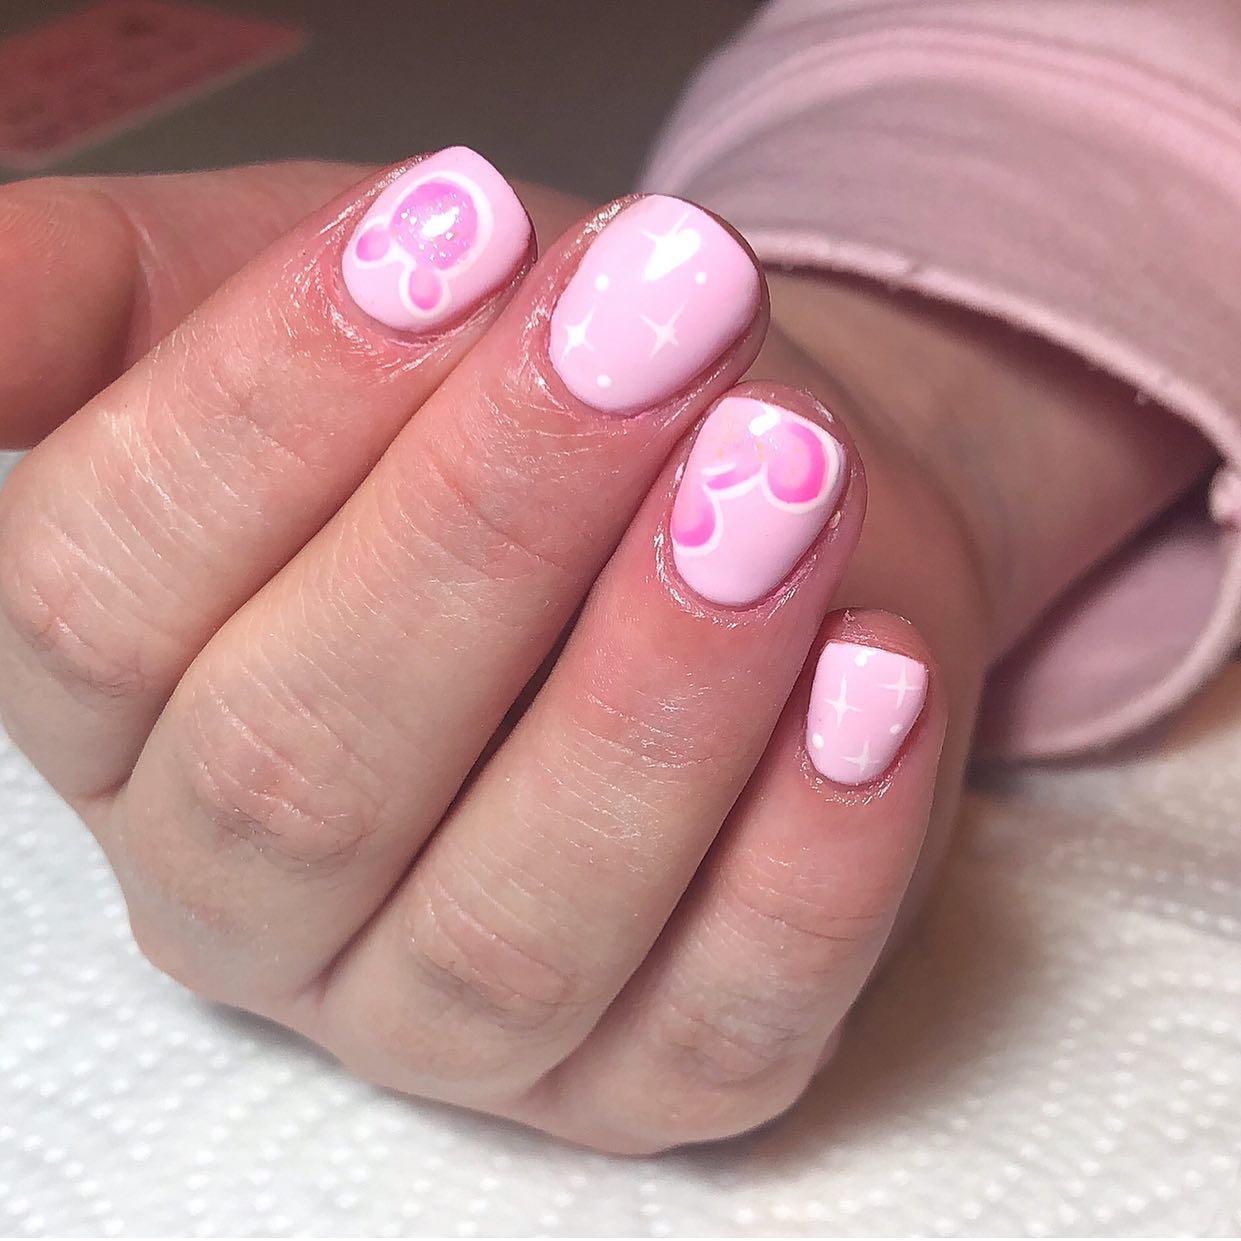 Twinkle Twinkle Little Star ⭐️ it's A girl 🎀 BabyShower Nails 💕 PRESSURE  Go Tag @1saucysantanaofficial @thegirljt @yungmiami3... | Instagram